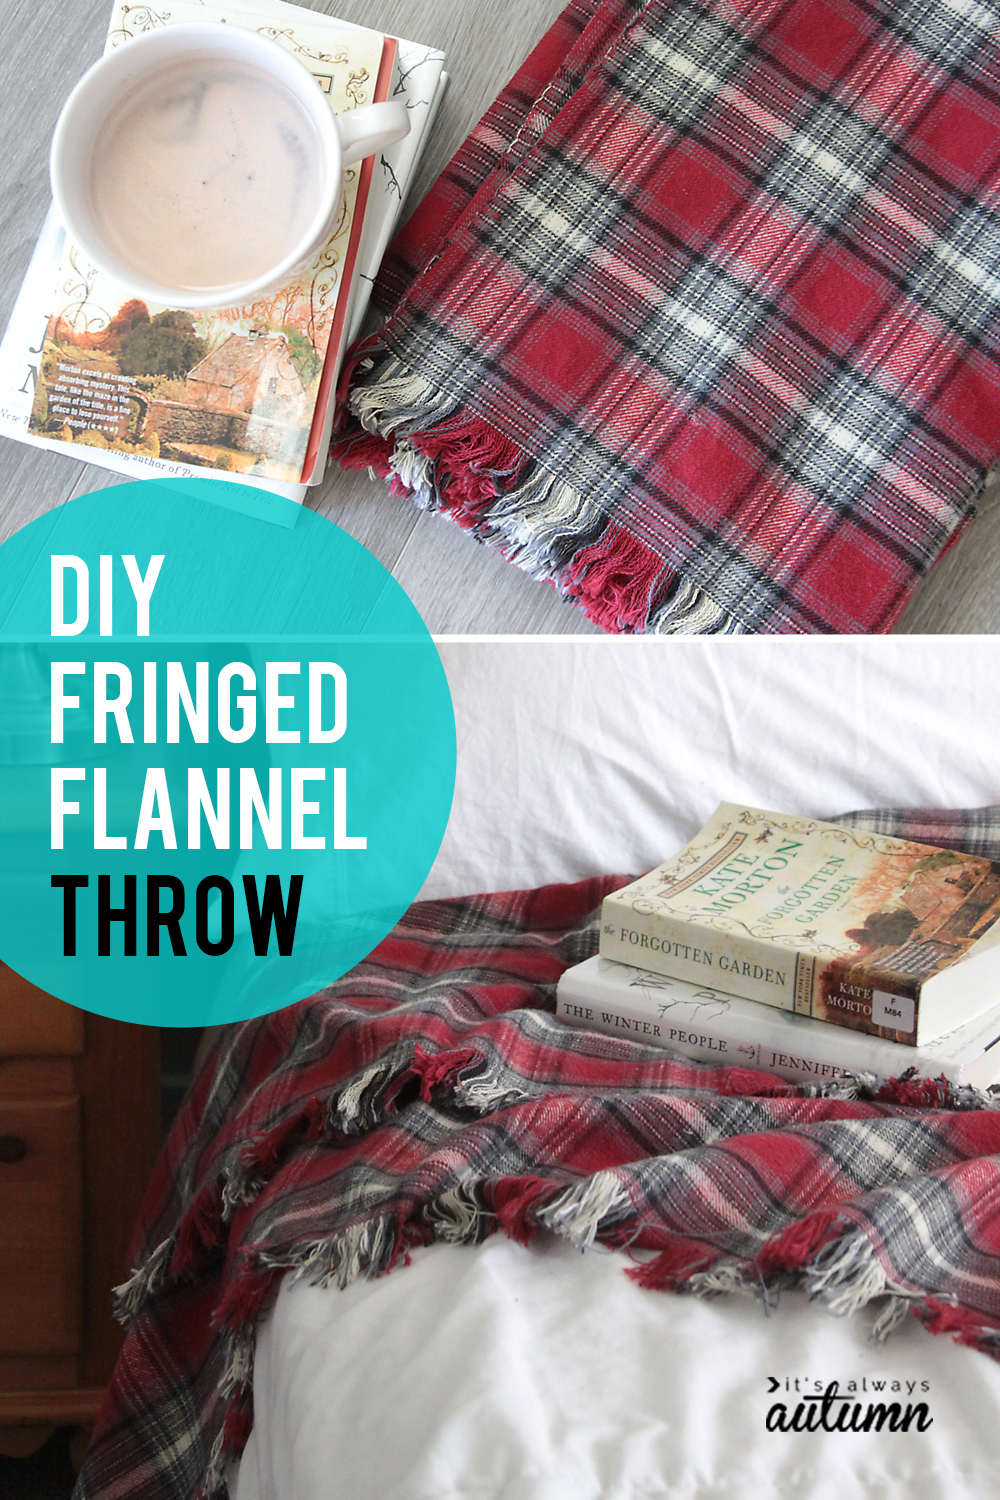 Learn how easy it is to make this DIY flannel throw blanket with cute fringed edge.